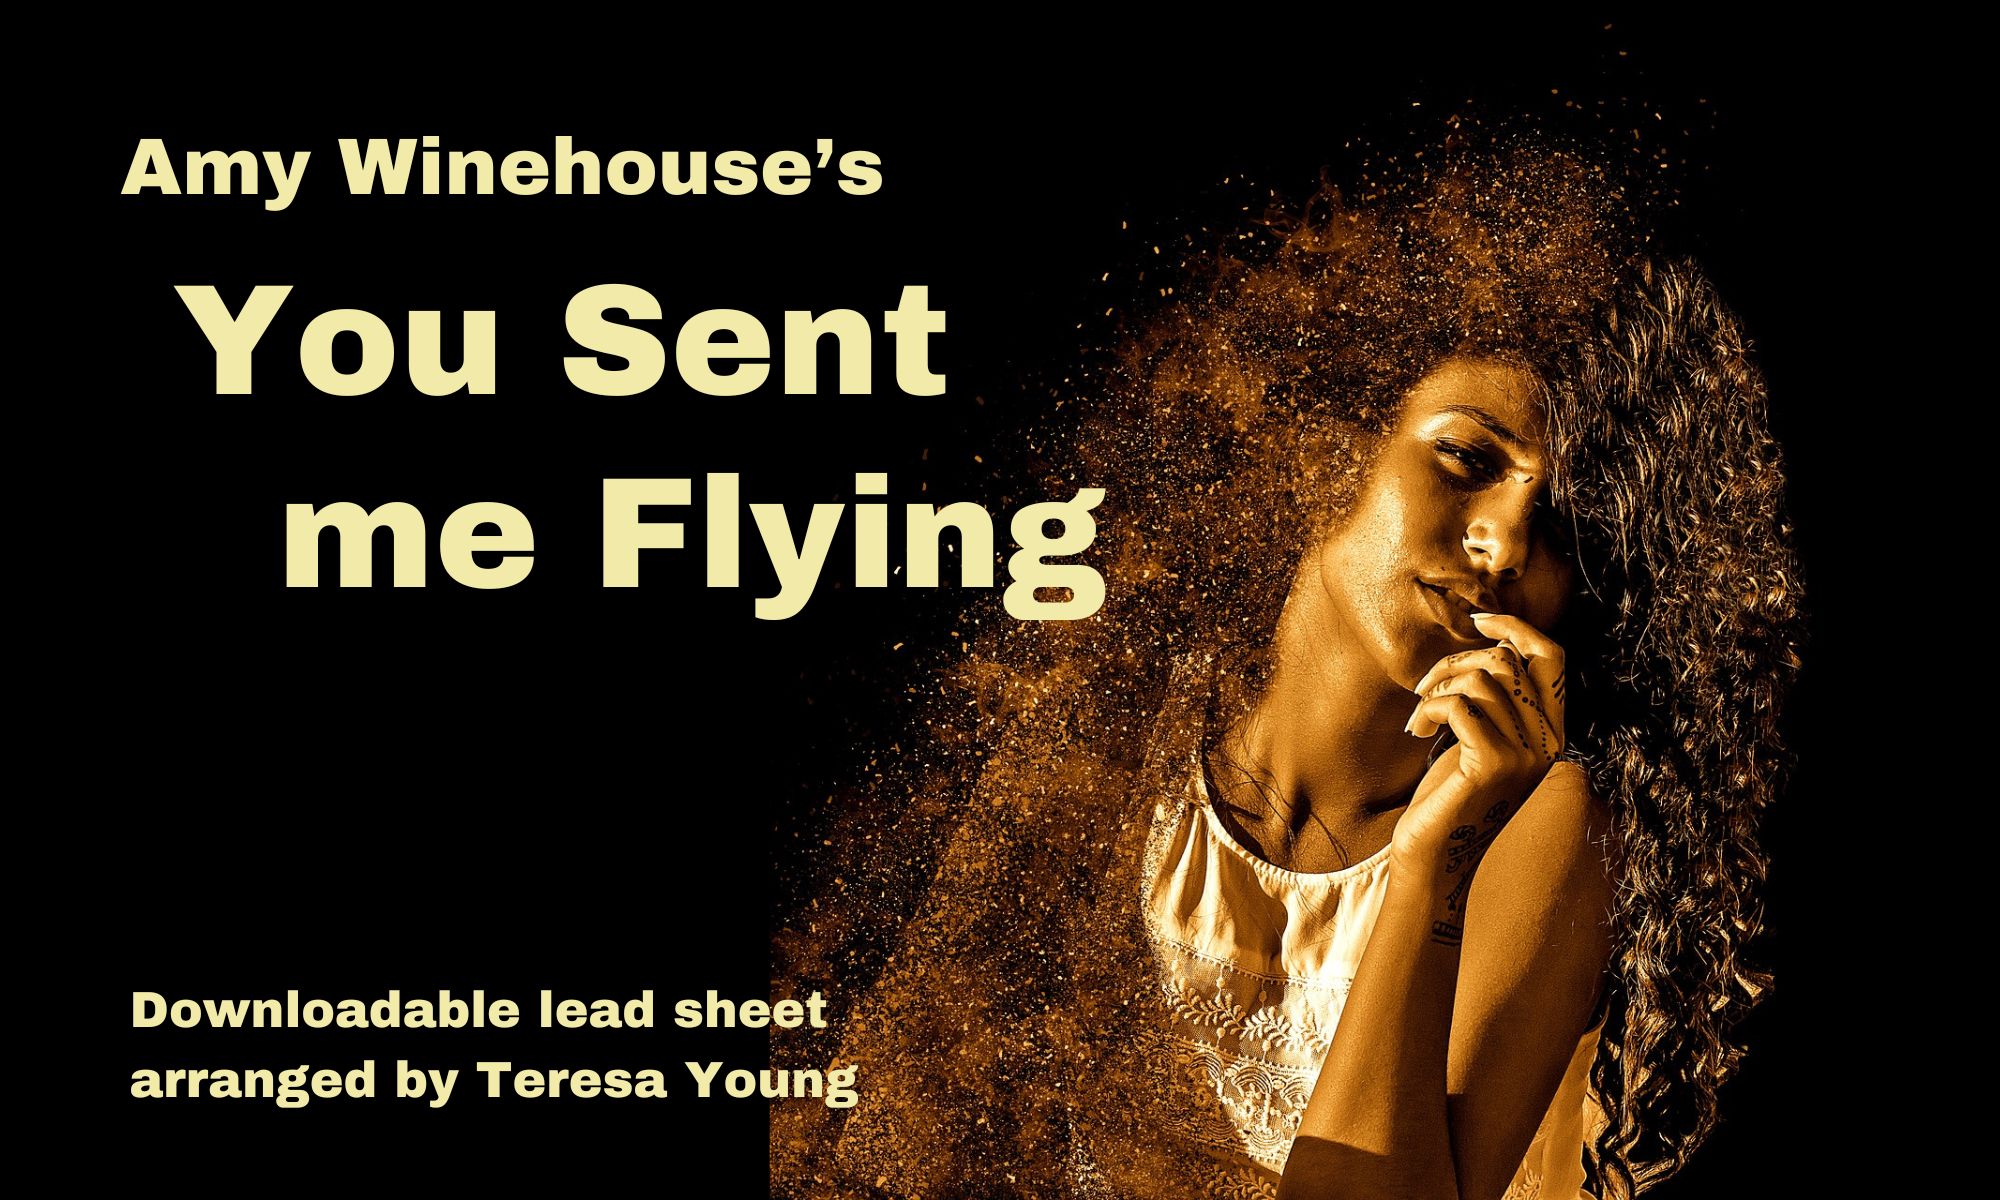 You Sent Me Flying downloadable lead sheet